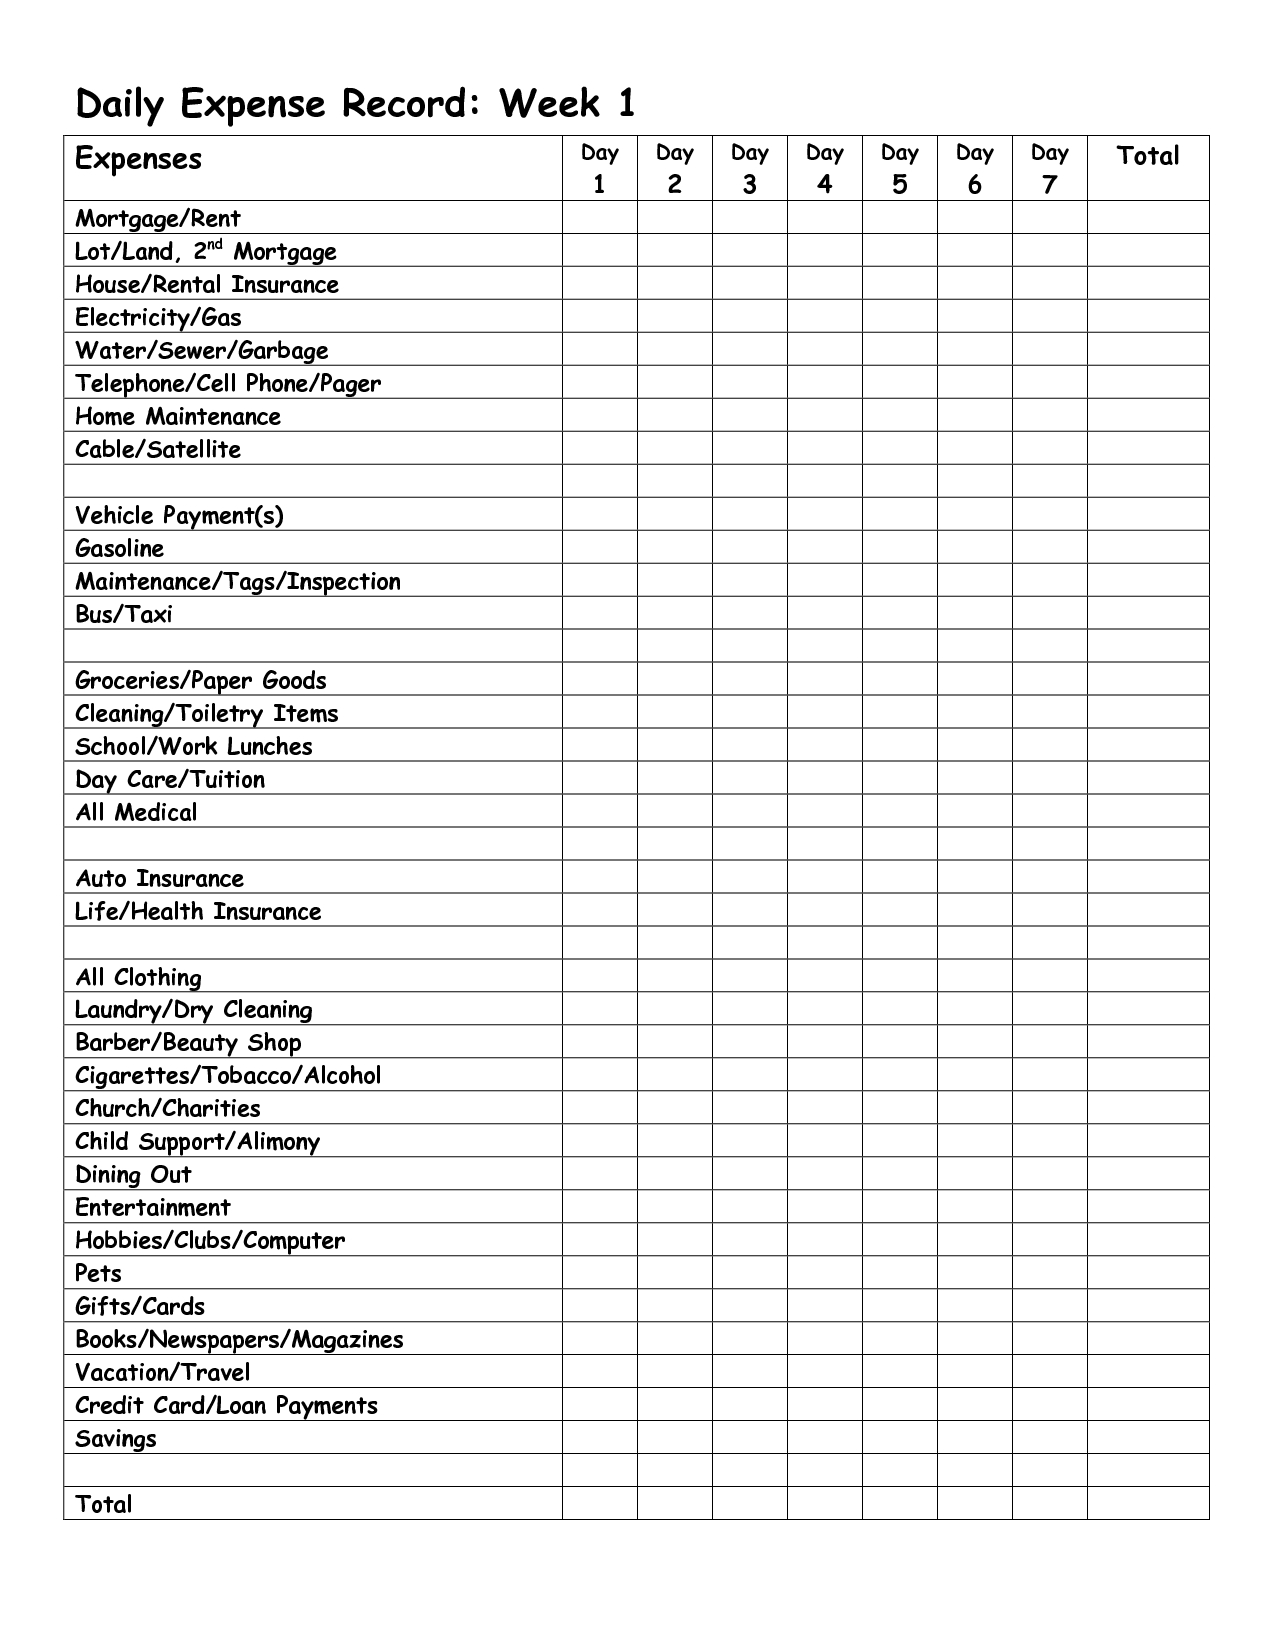 Monthly Expense Report Template | Daily Expense Record Week Within Gas Mileage Expense Report Template